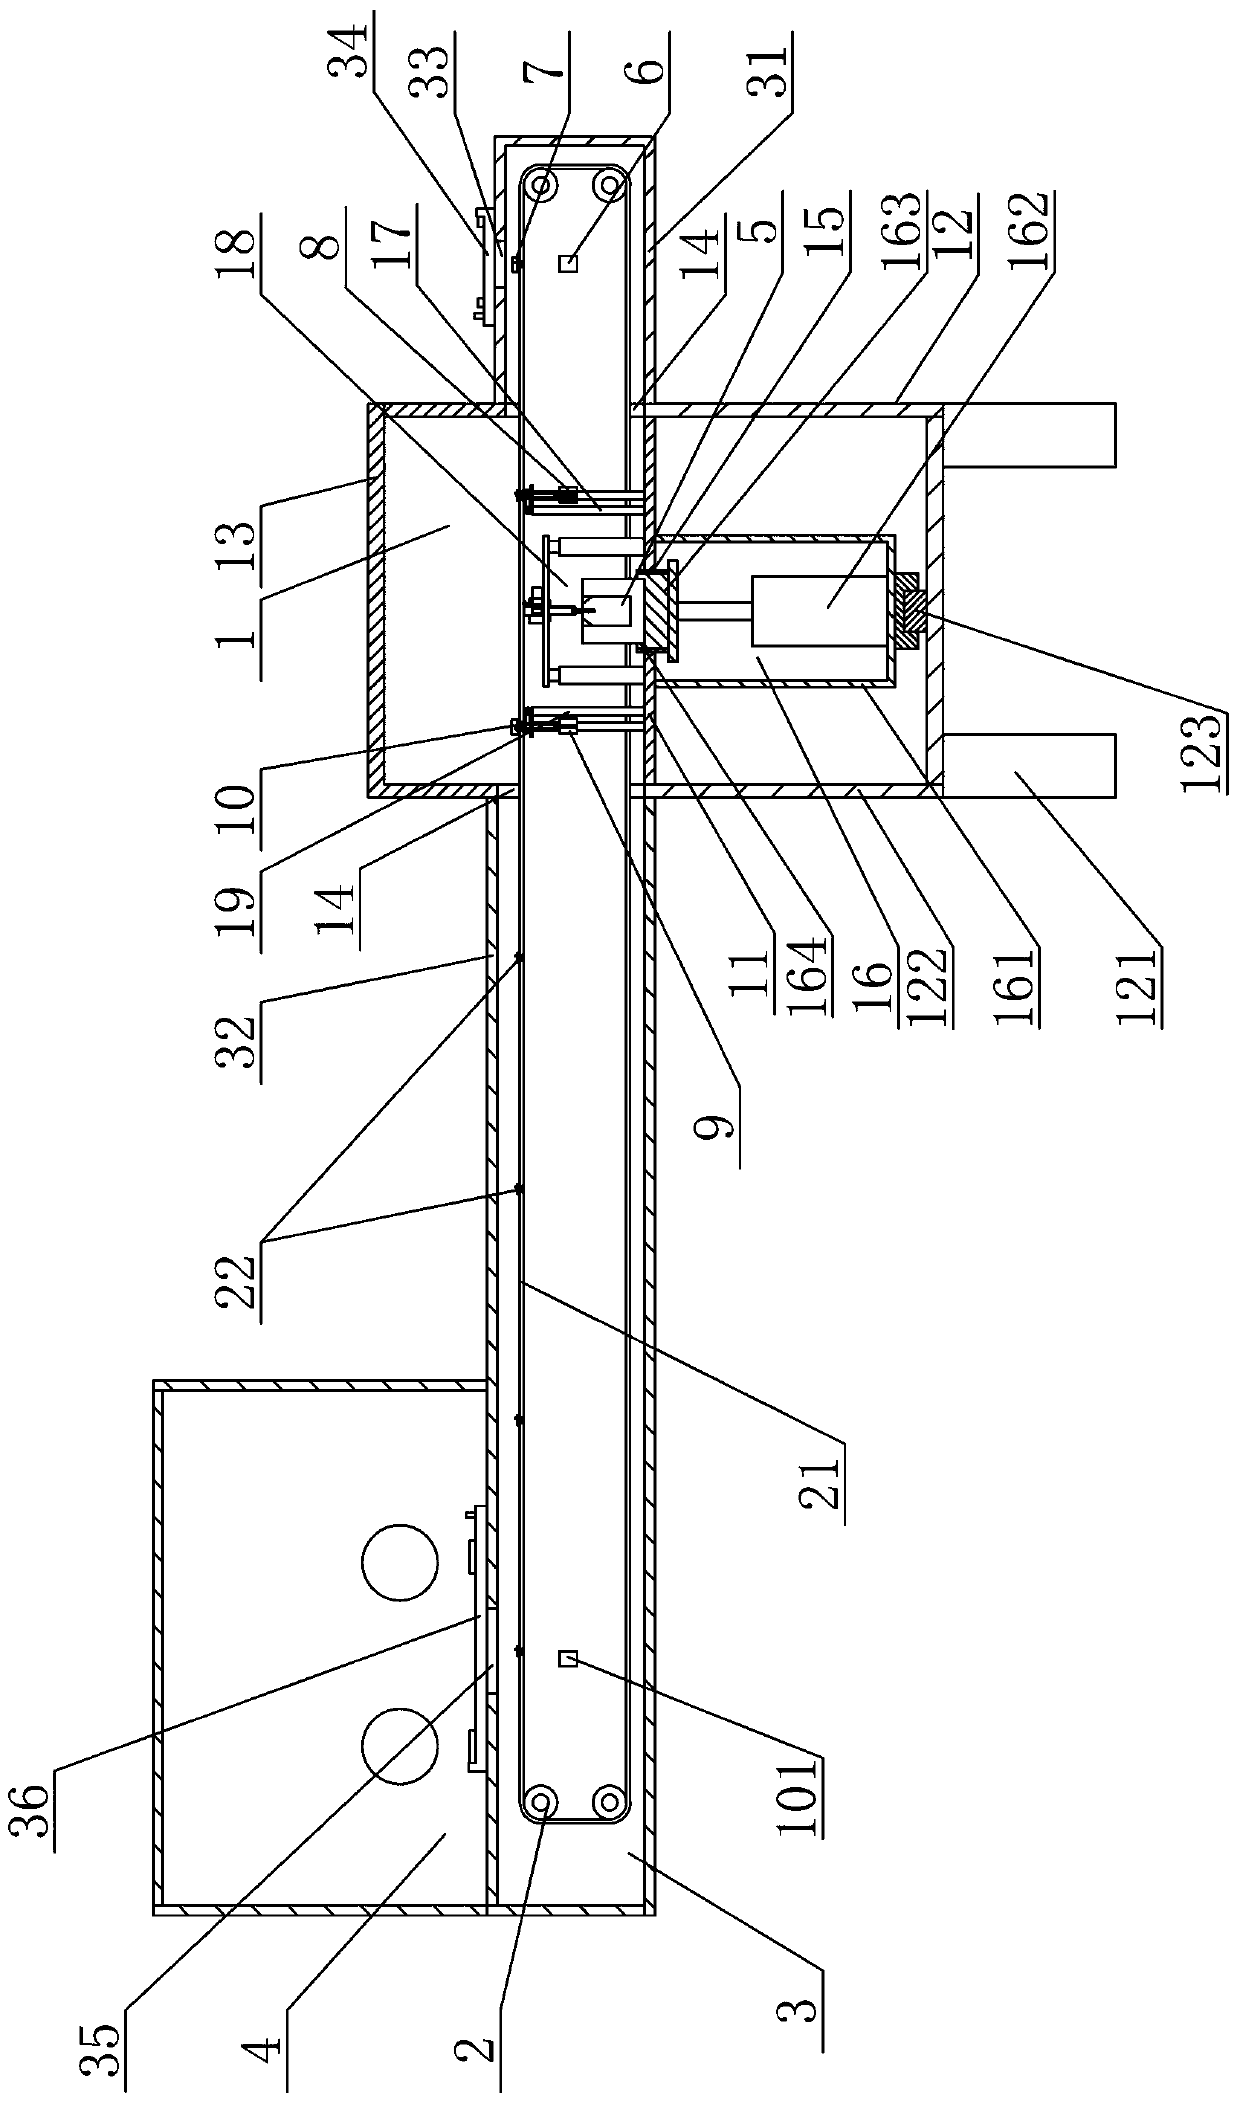 Delivery mechanism for radiopharmaceutical drug-drawing conveying device